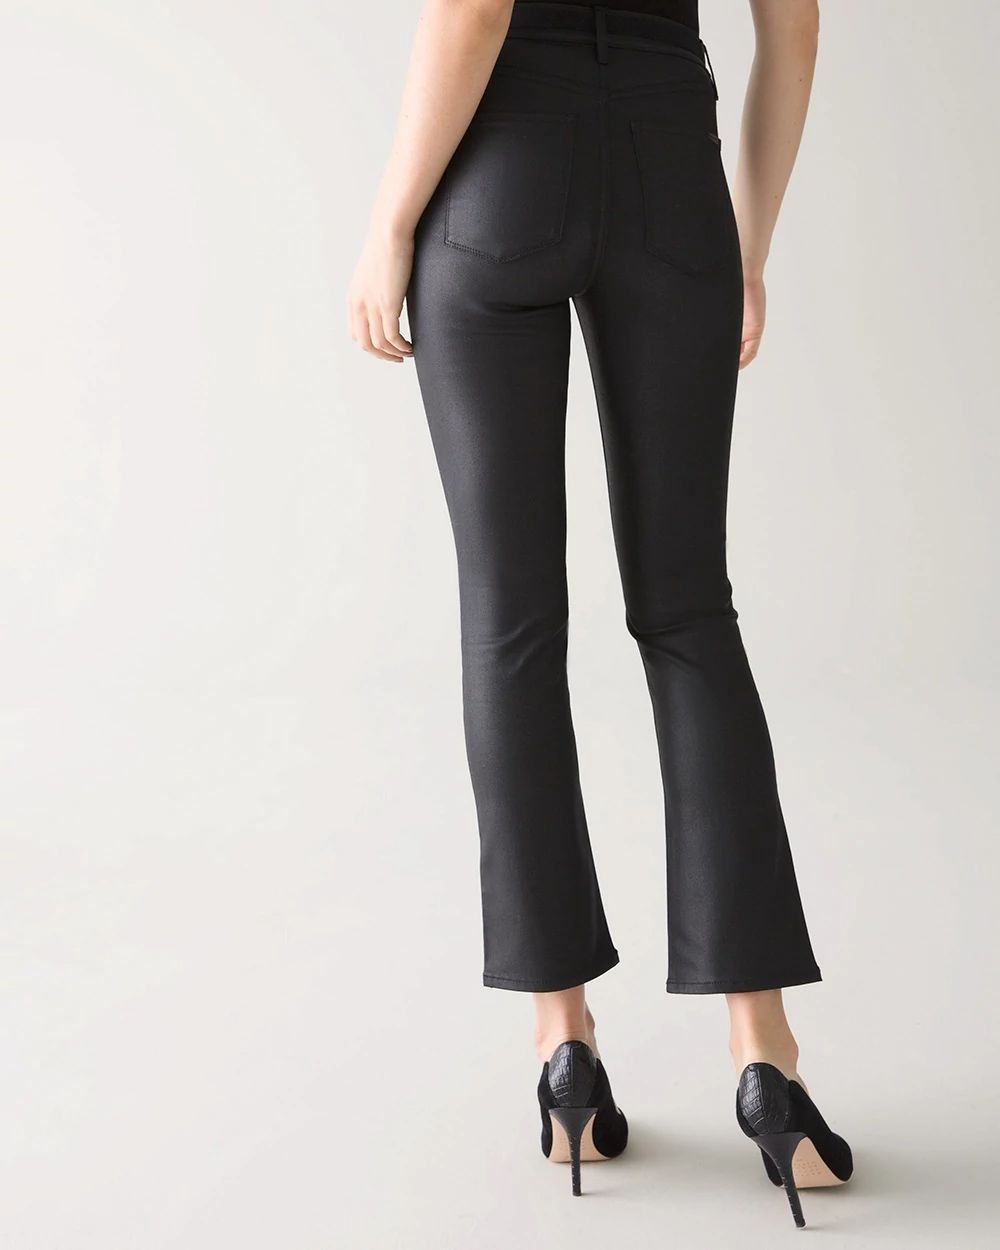 Petite High-Rise Coated Bootcut Crop Jeans click to view larger image.